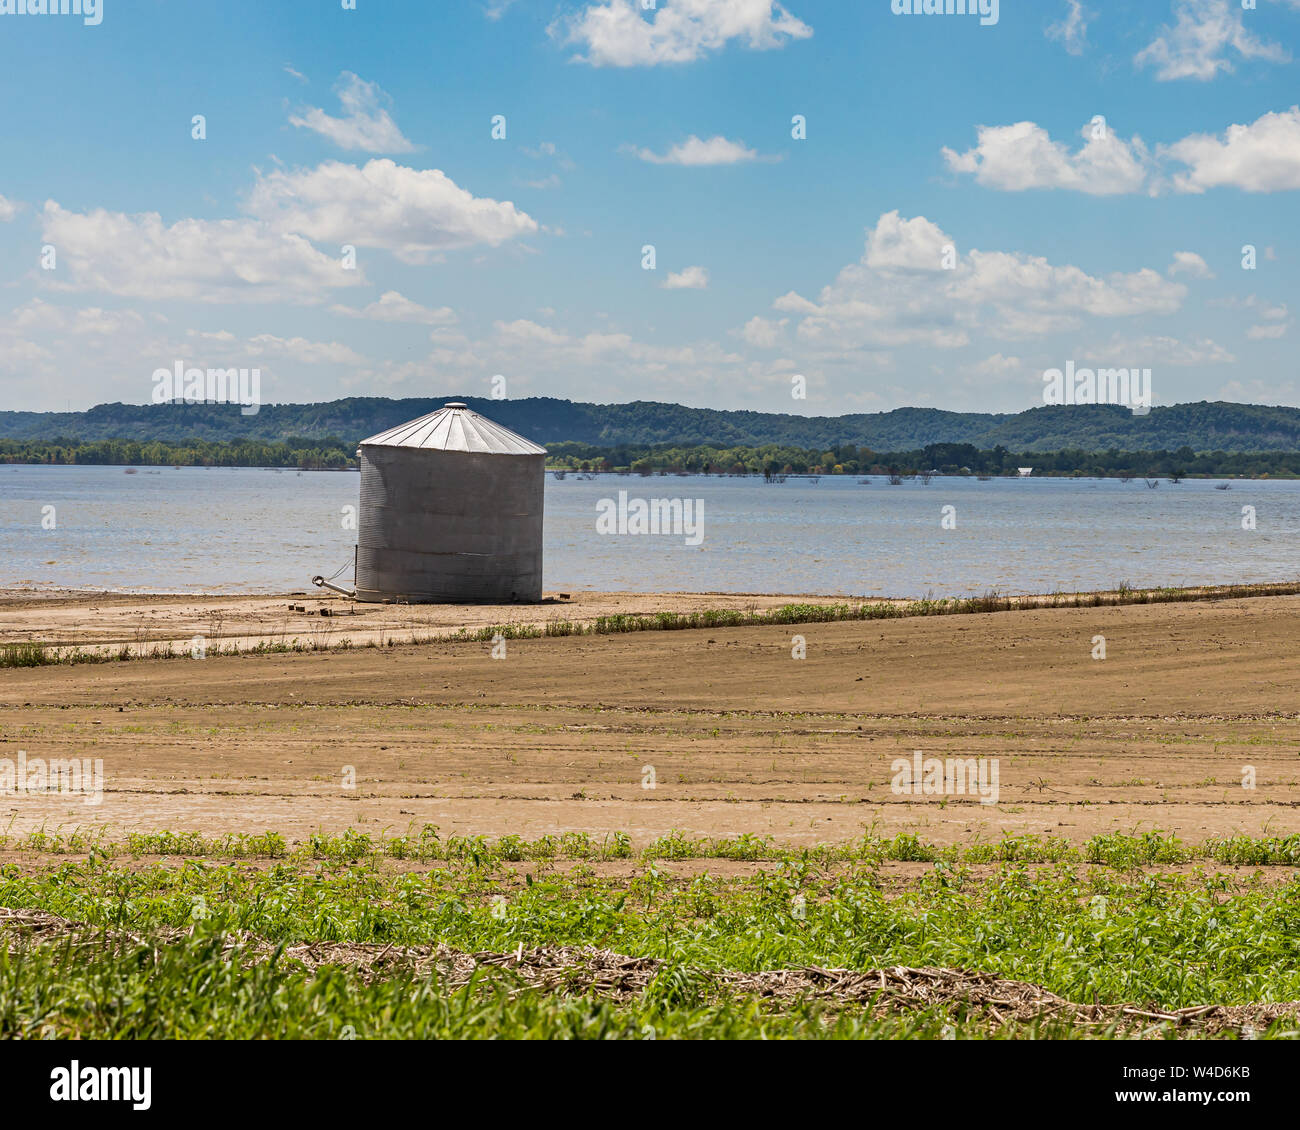 Mississippi River flooding has damaged farm building and grain bins, which is revealed as flood waters are receding Stock Photo